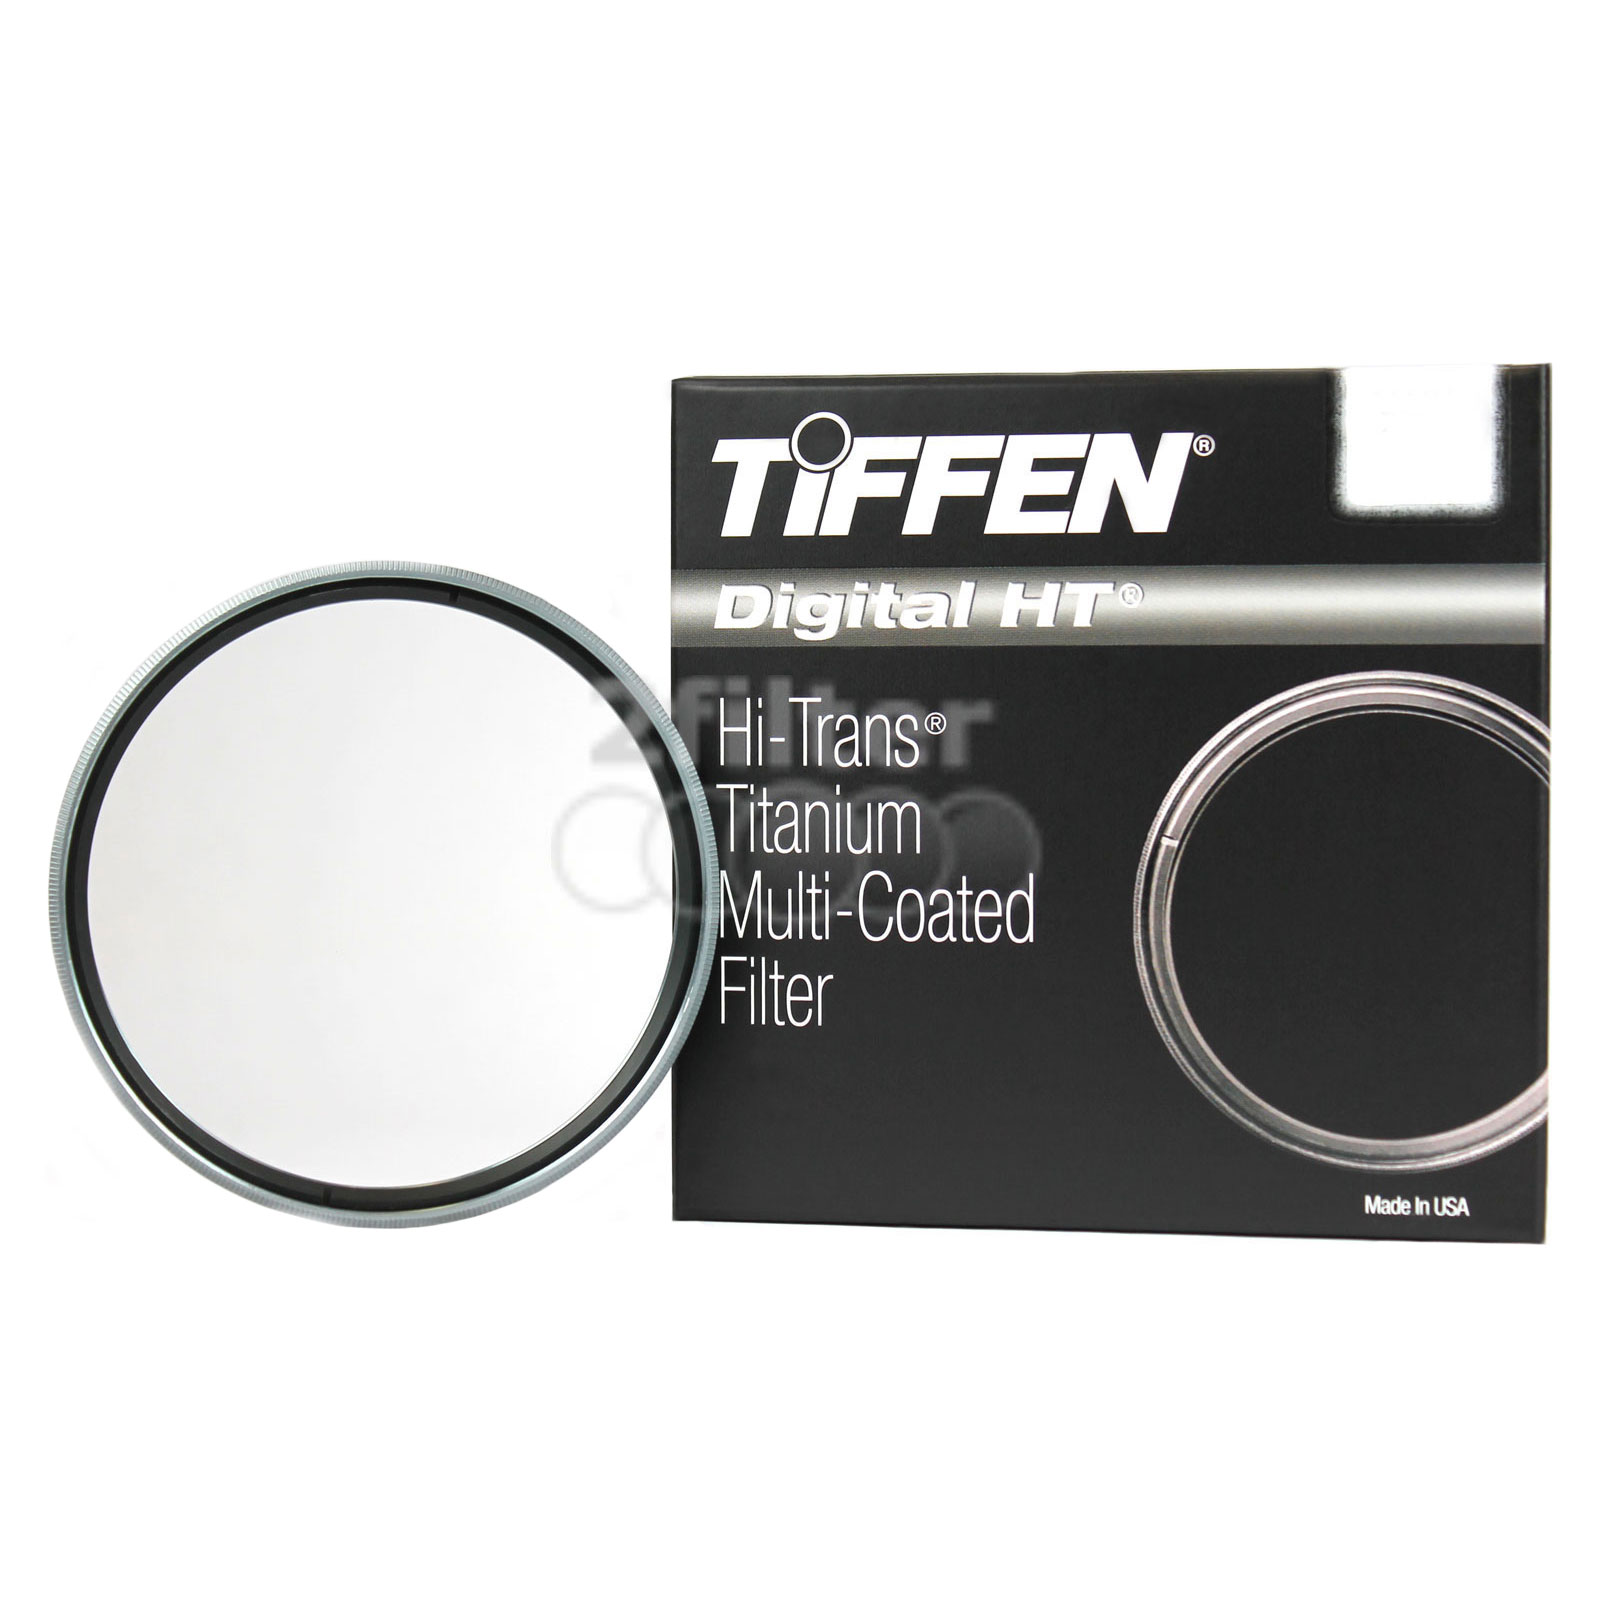 Tiffen 72mm Photo Twin Pack Filters 